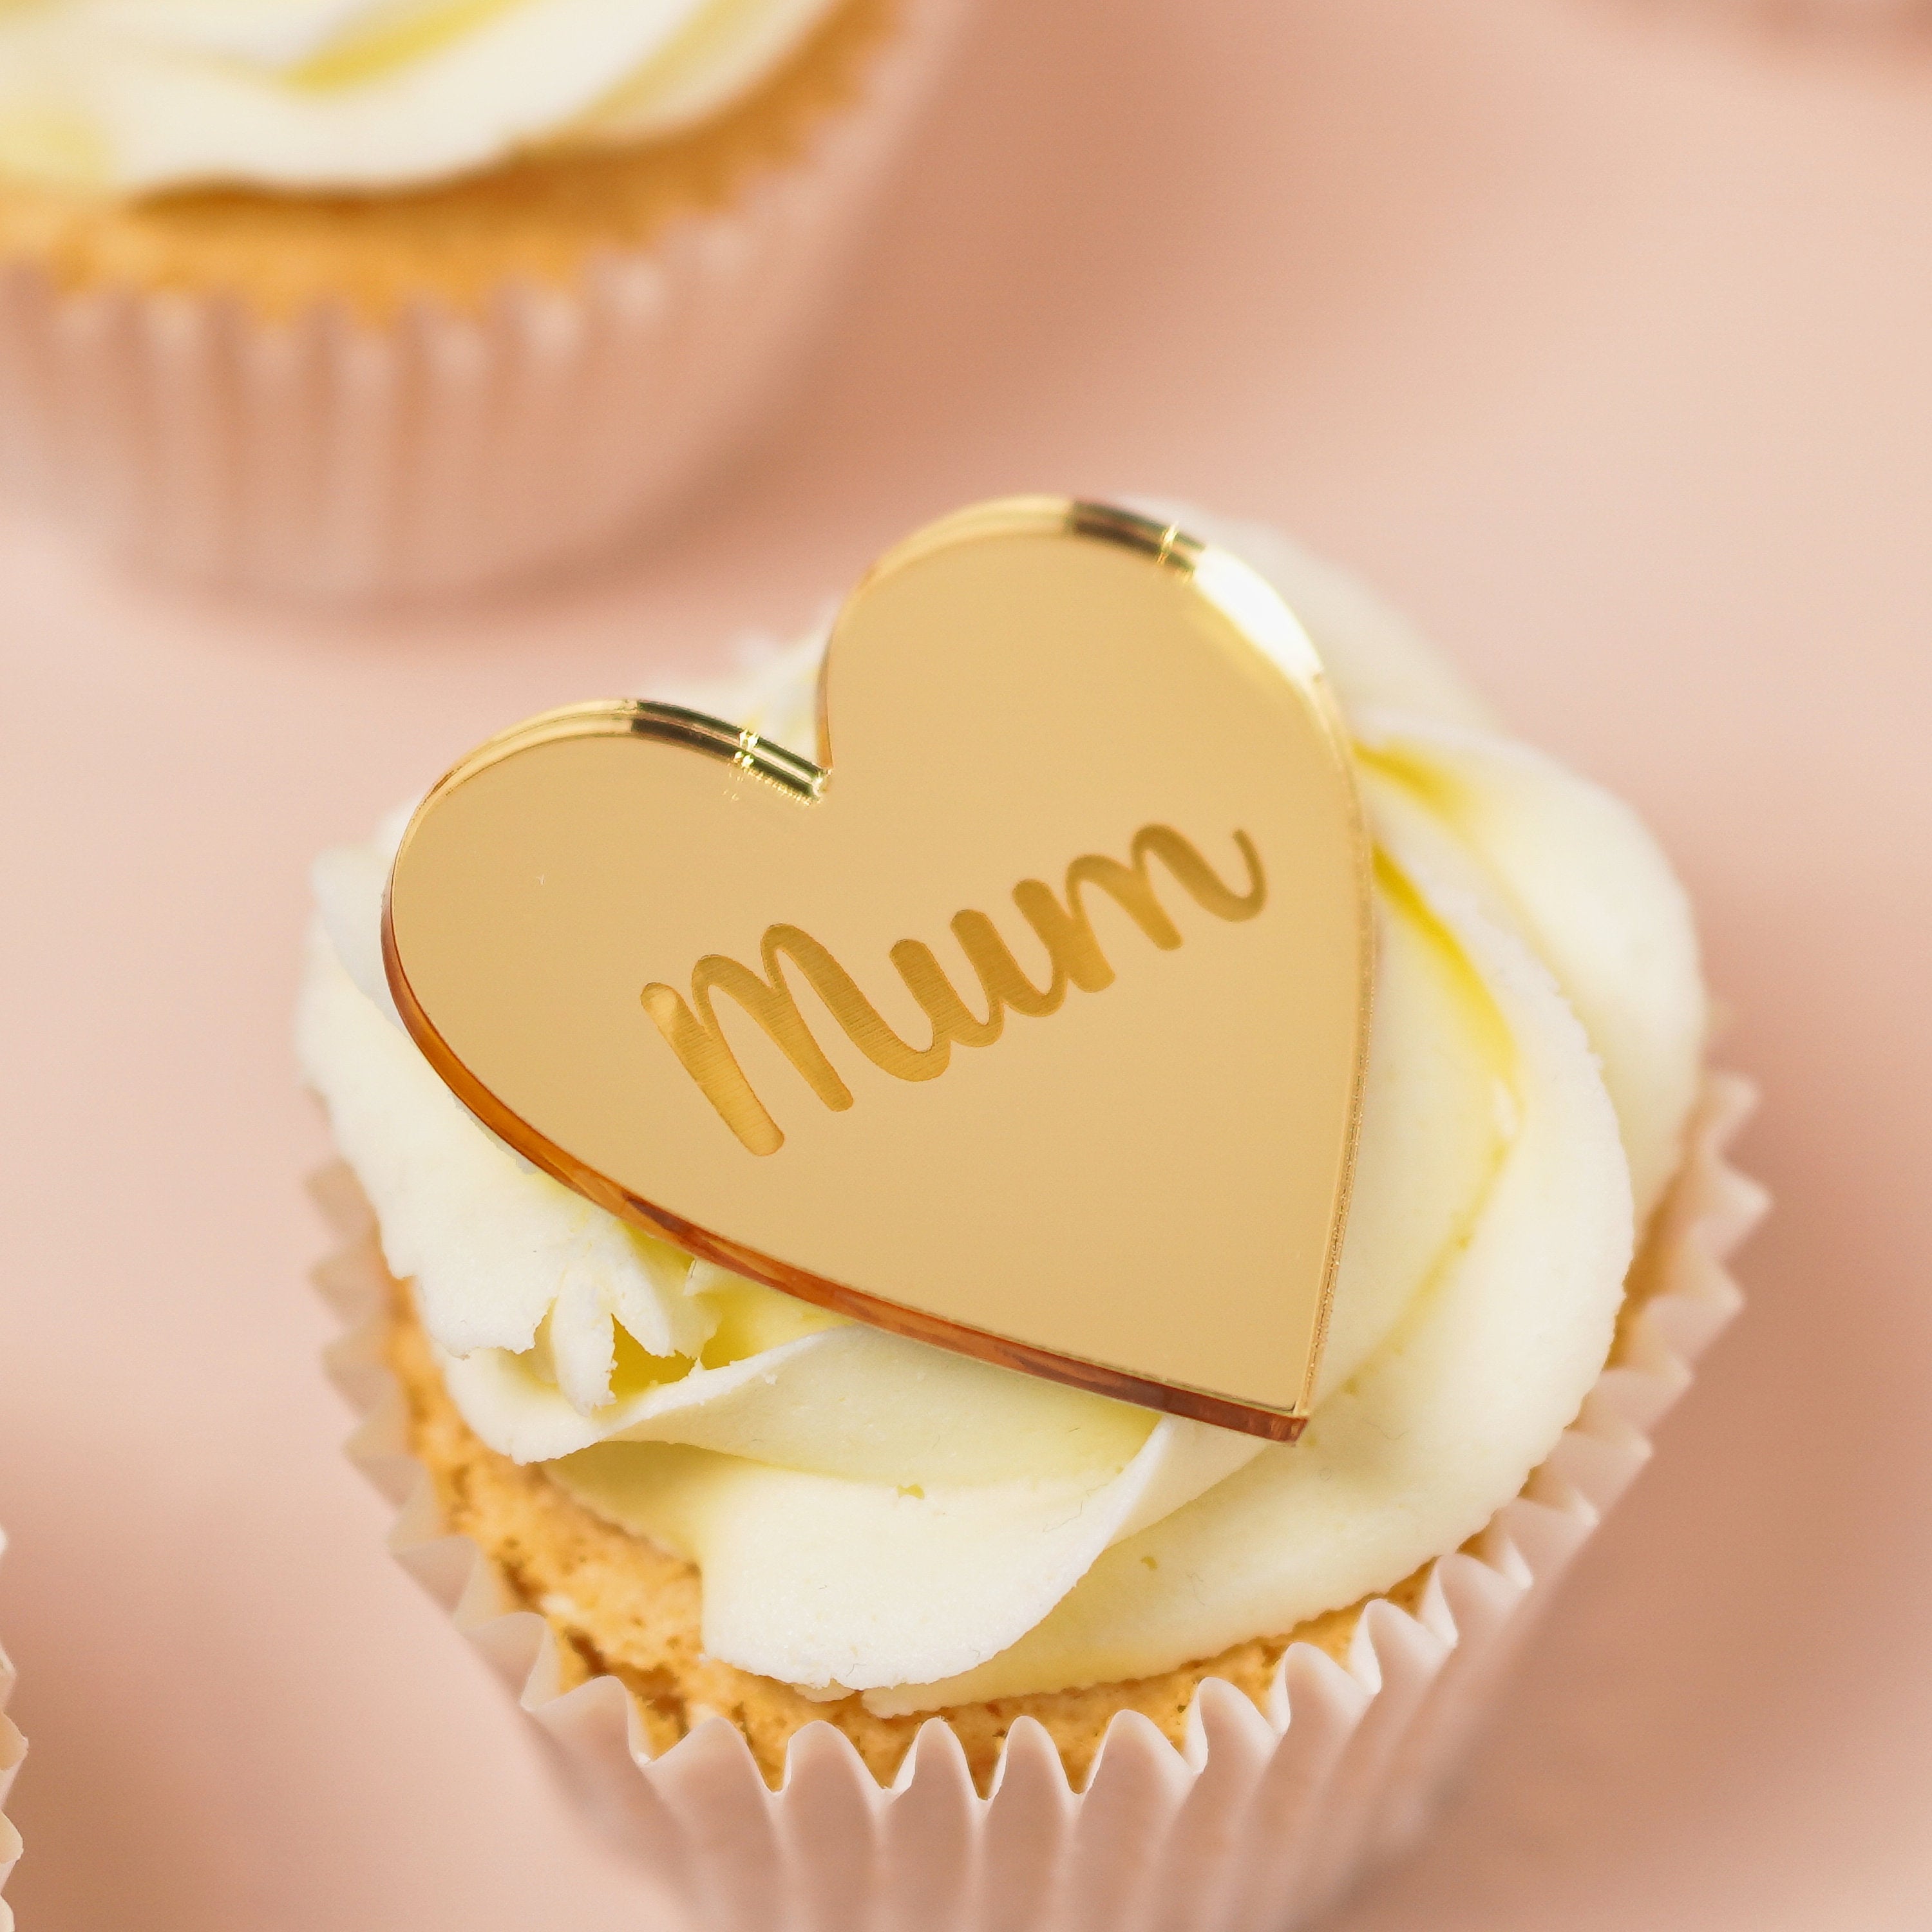 Happy Mothers Day cupcake charm